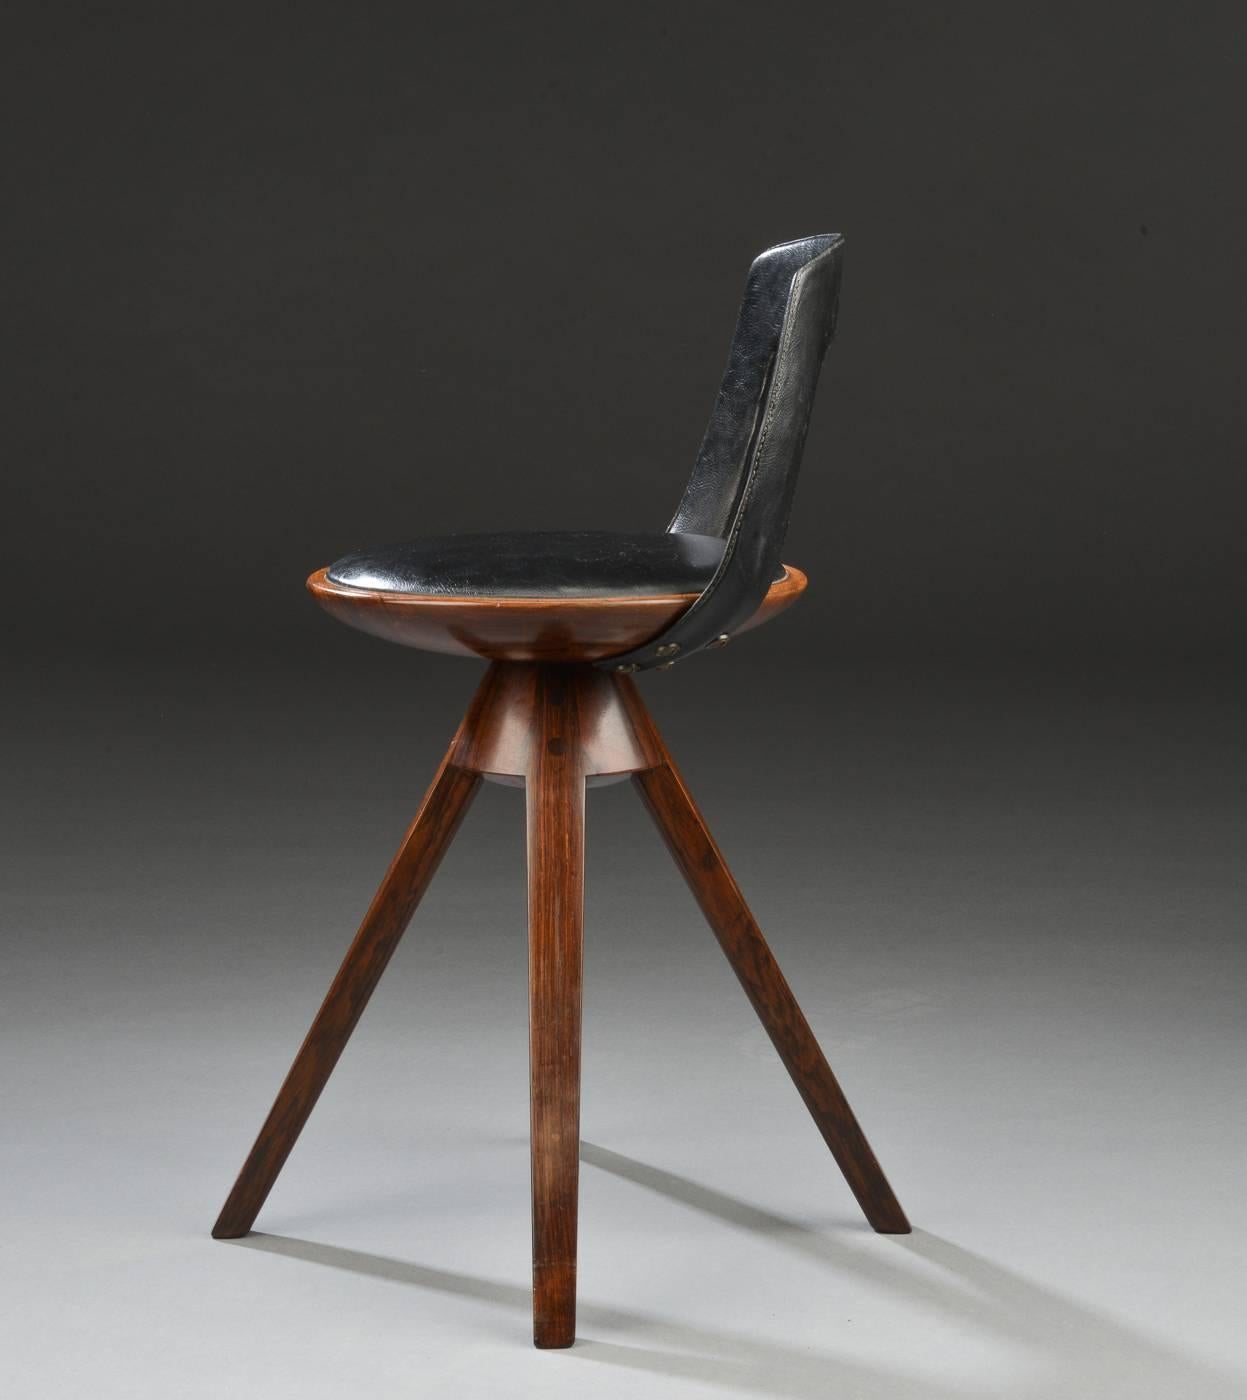 A swivel chair or stool, sloping tapered solid Brazilian rosewood legs, seat and back with original black leather upholstery by Tove and Edvard Kindt-Larsen. 

Produced by master cabinetmaker Thorald Madsen, with maker's plaque. 

Designed in